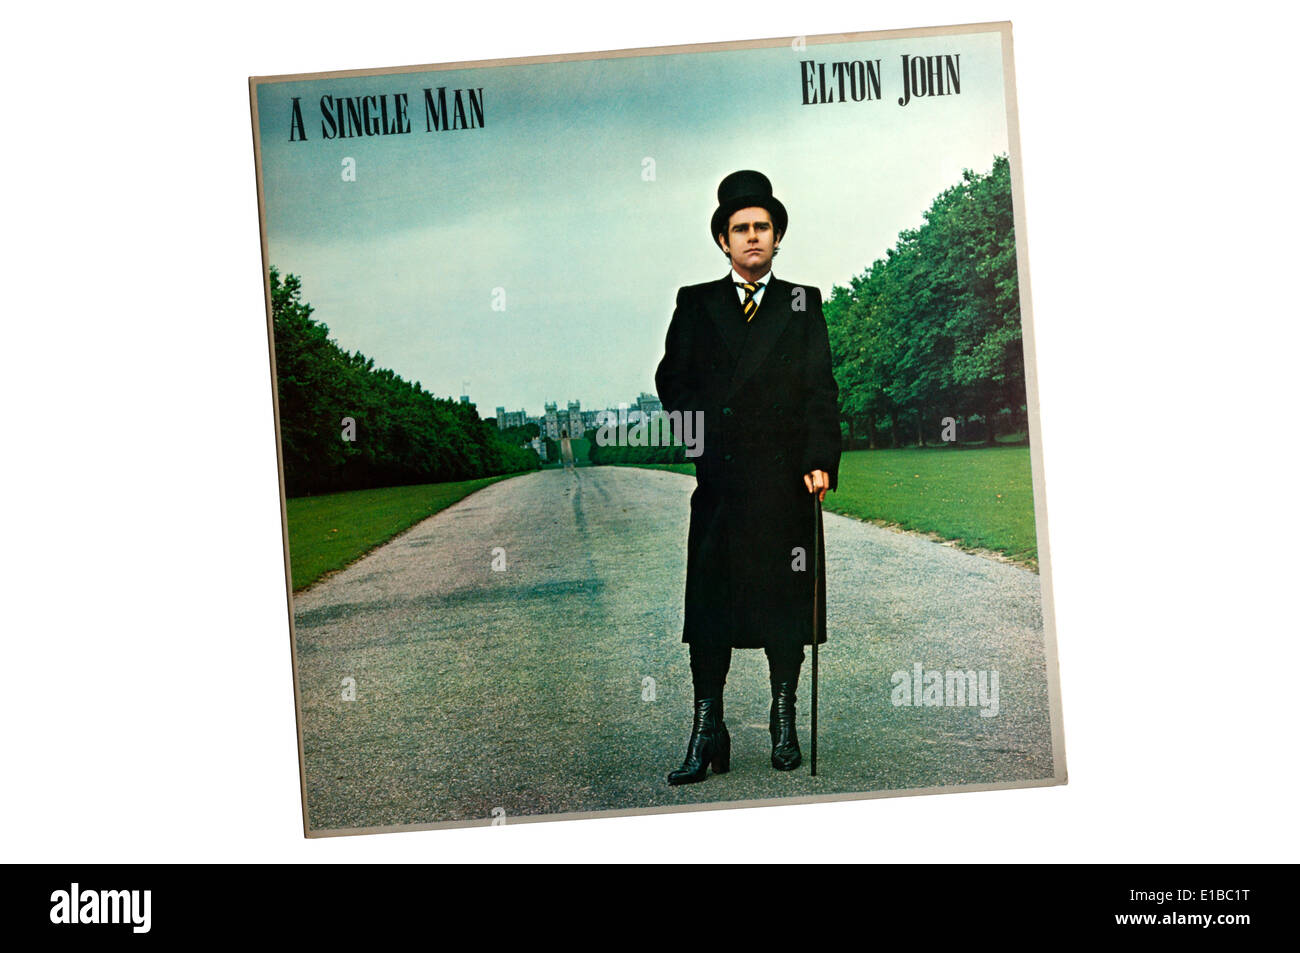 A Single Man was the 12th studio album by British singer/songwriter Elton John, released in 1978. Stock Photo